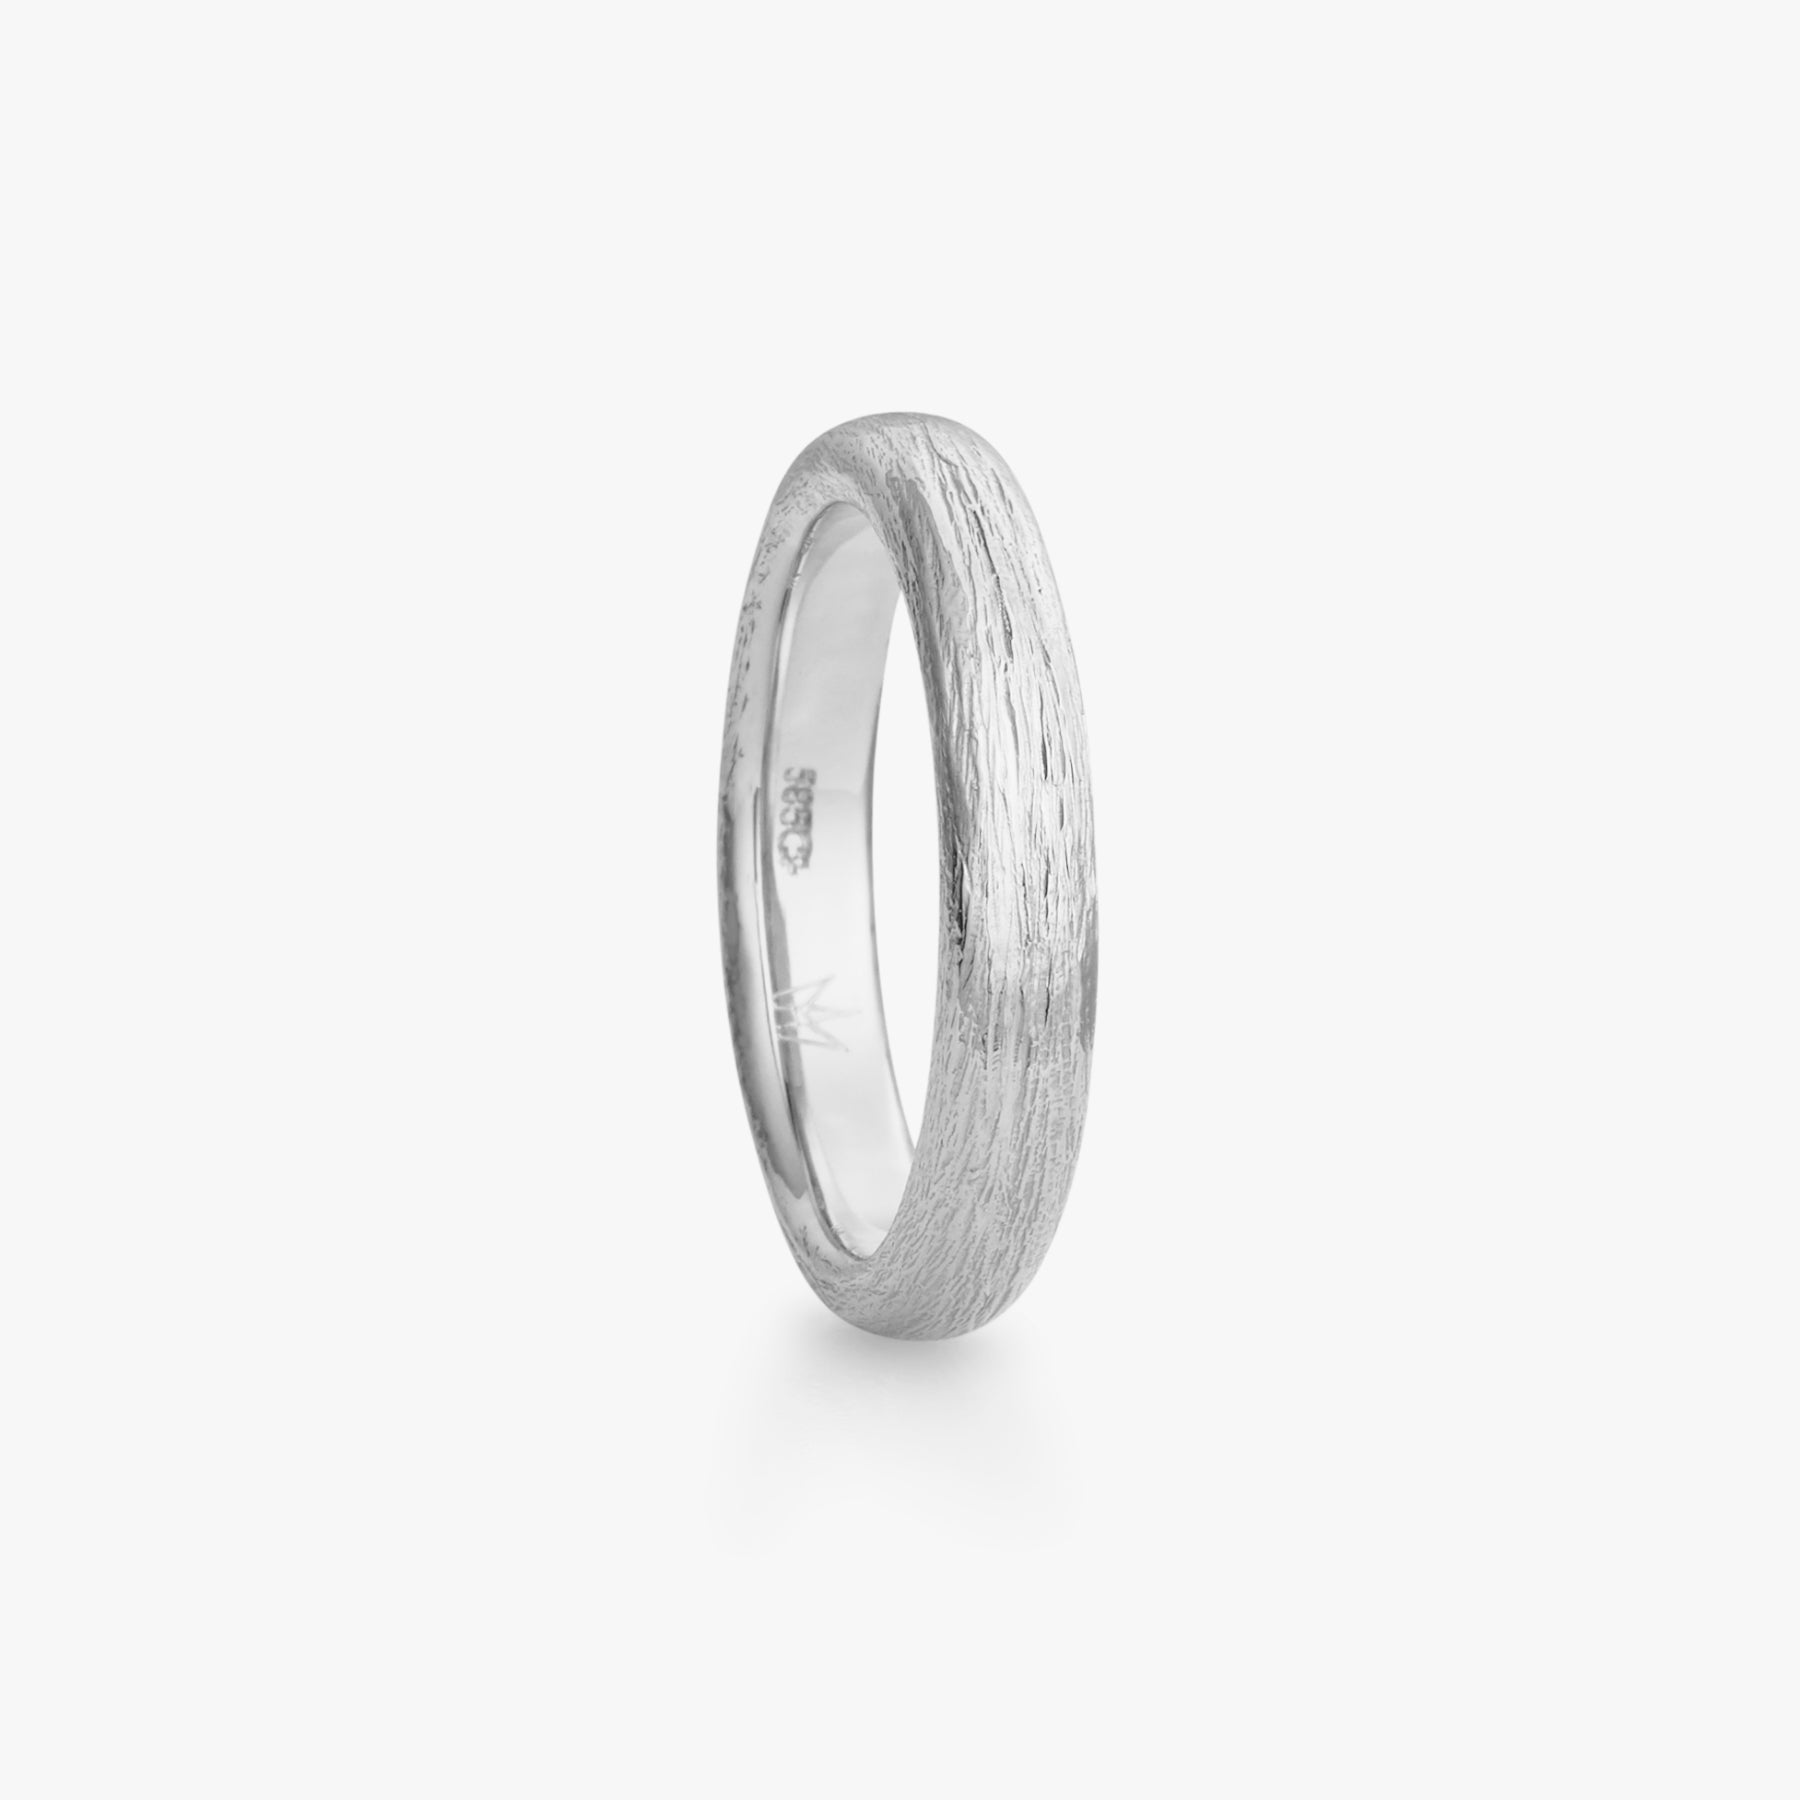 Fossefall ring in white gold, gentleman